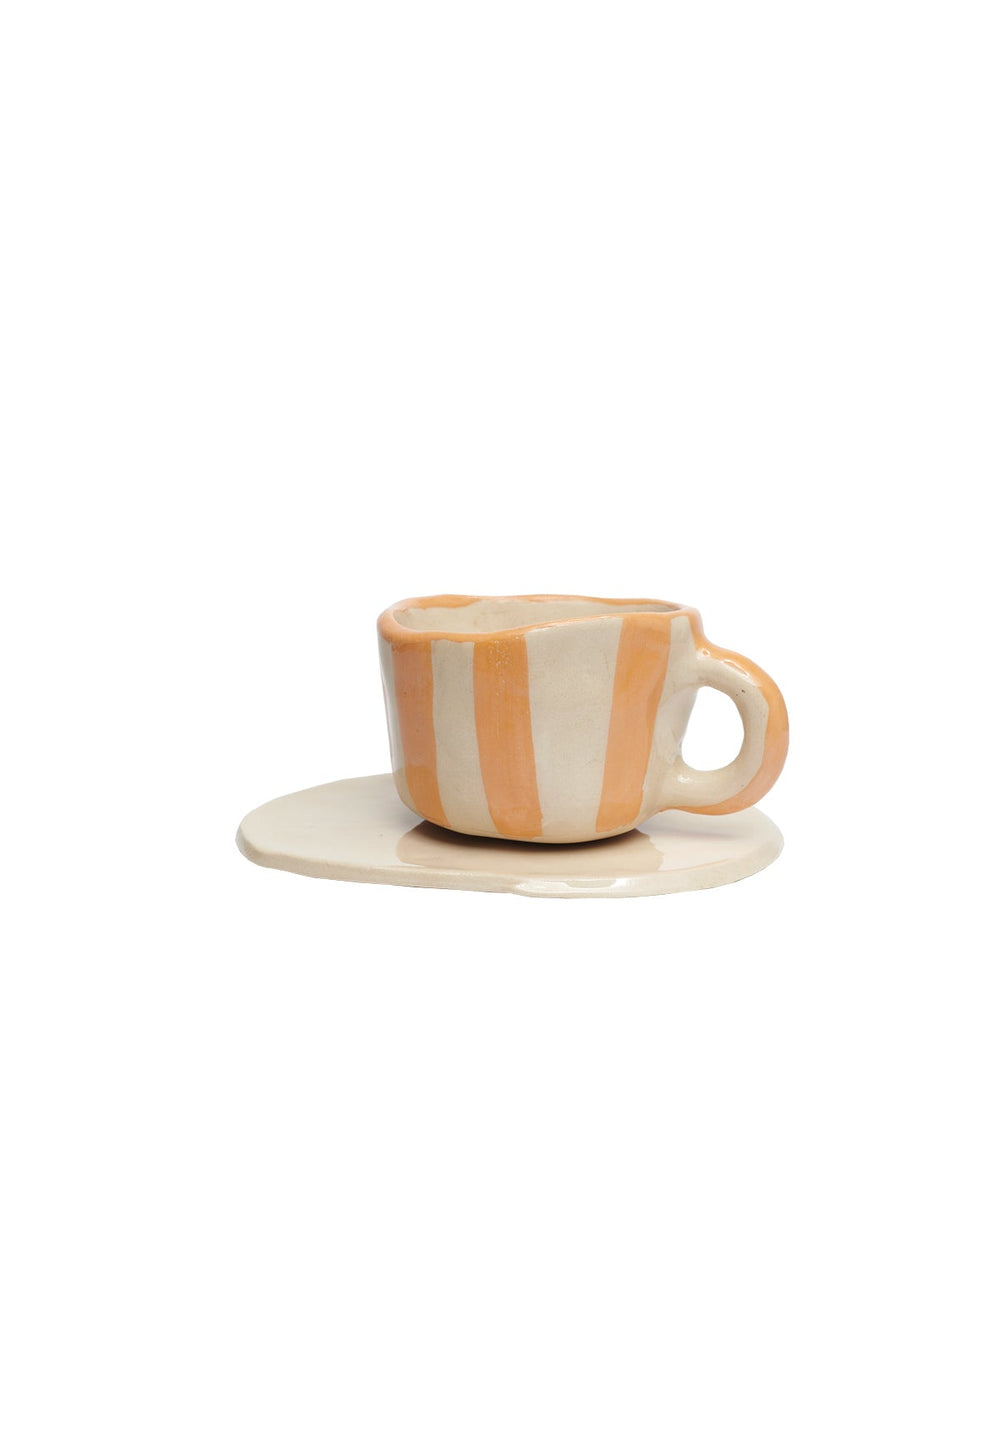 CUP AND PLATE ORANGE - Moeon